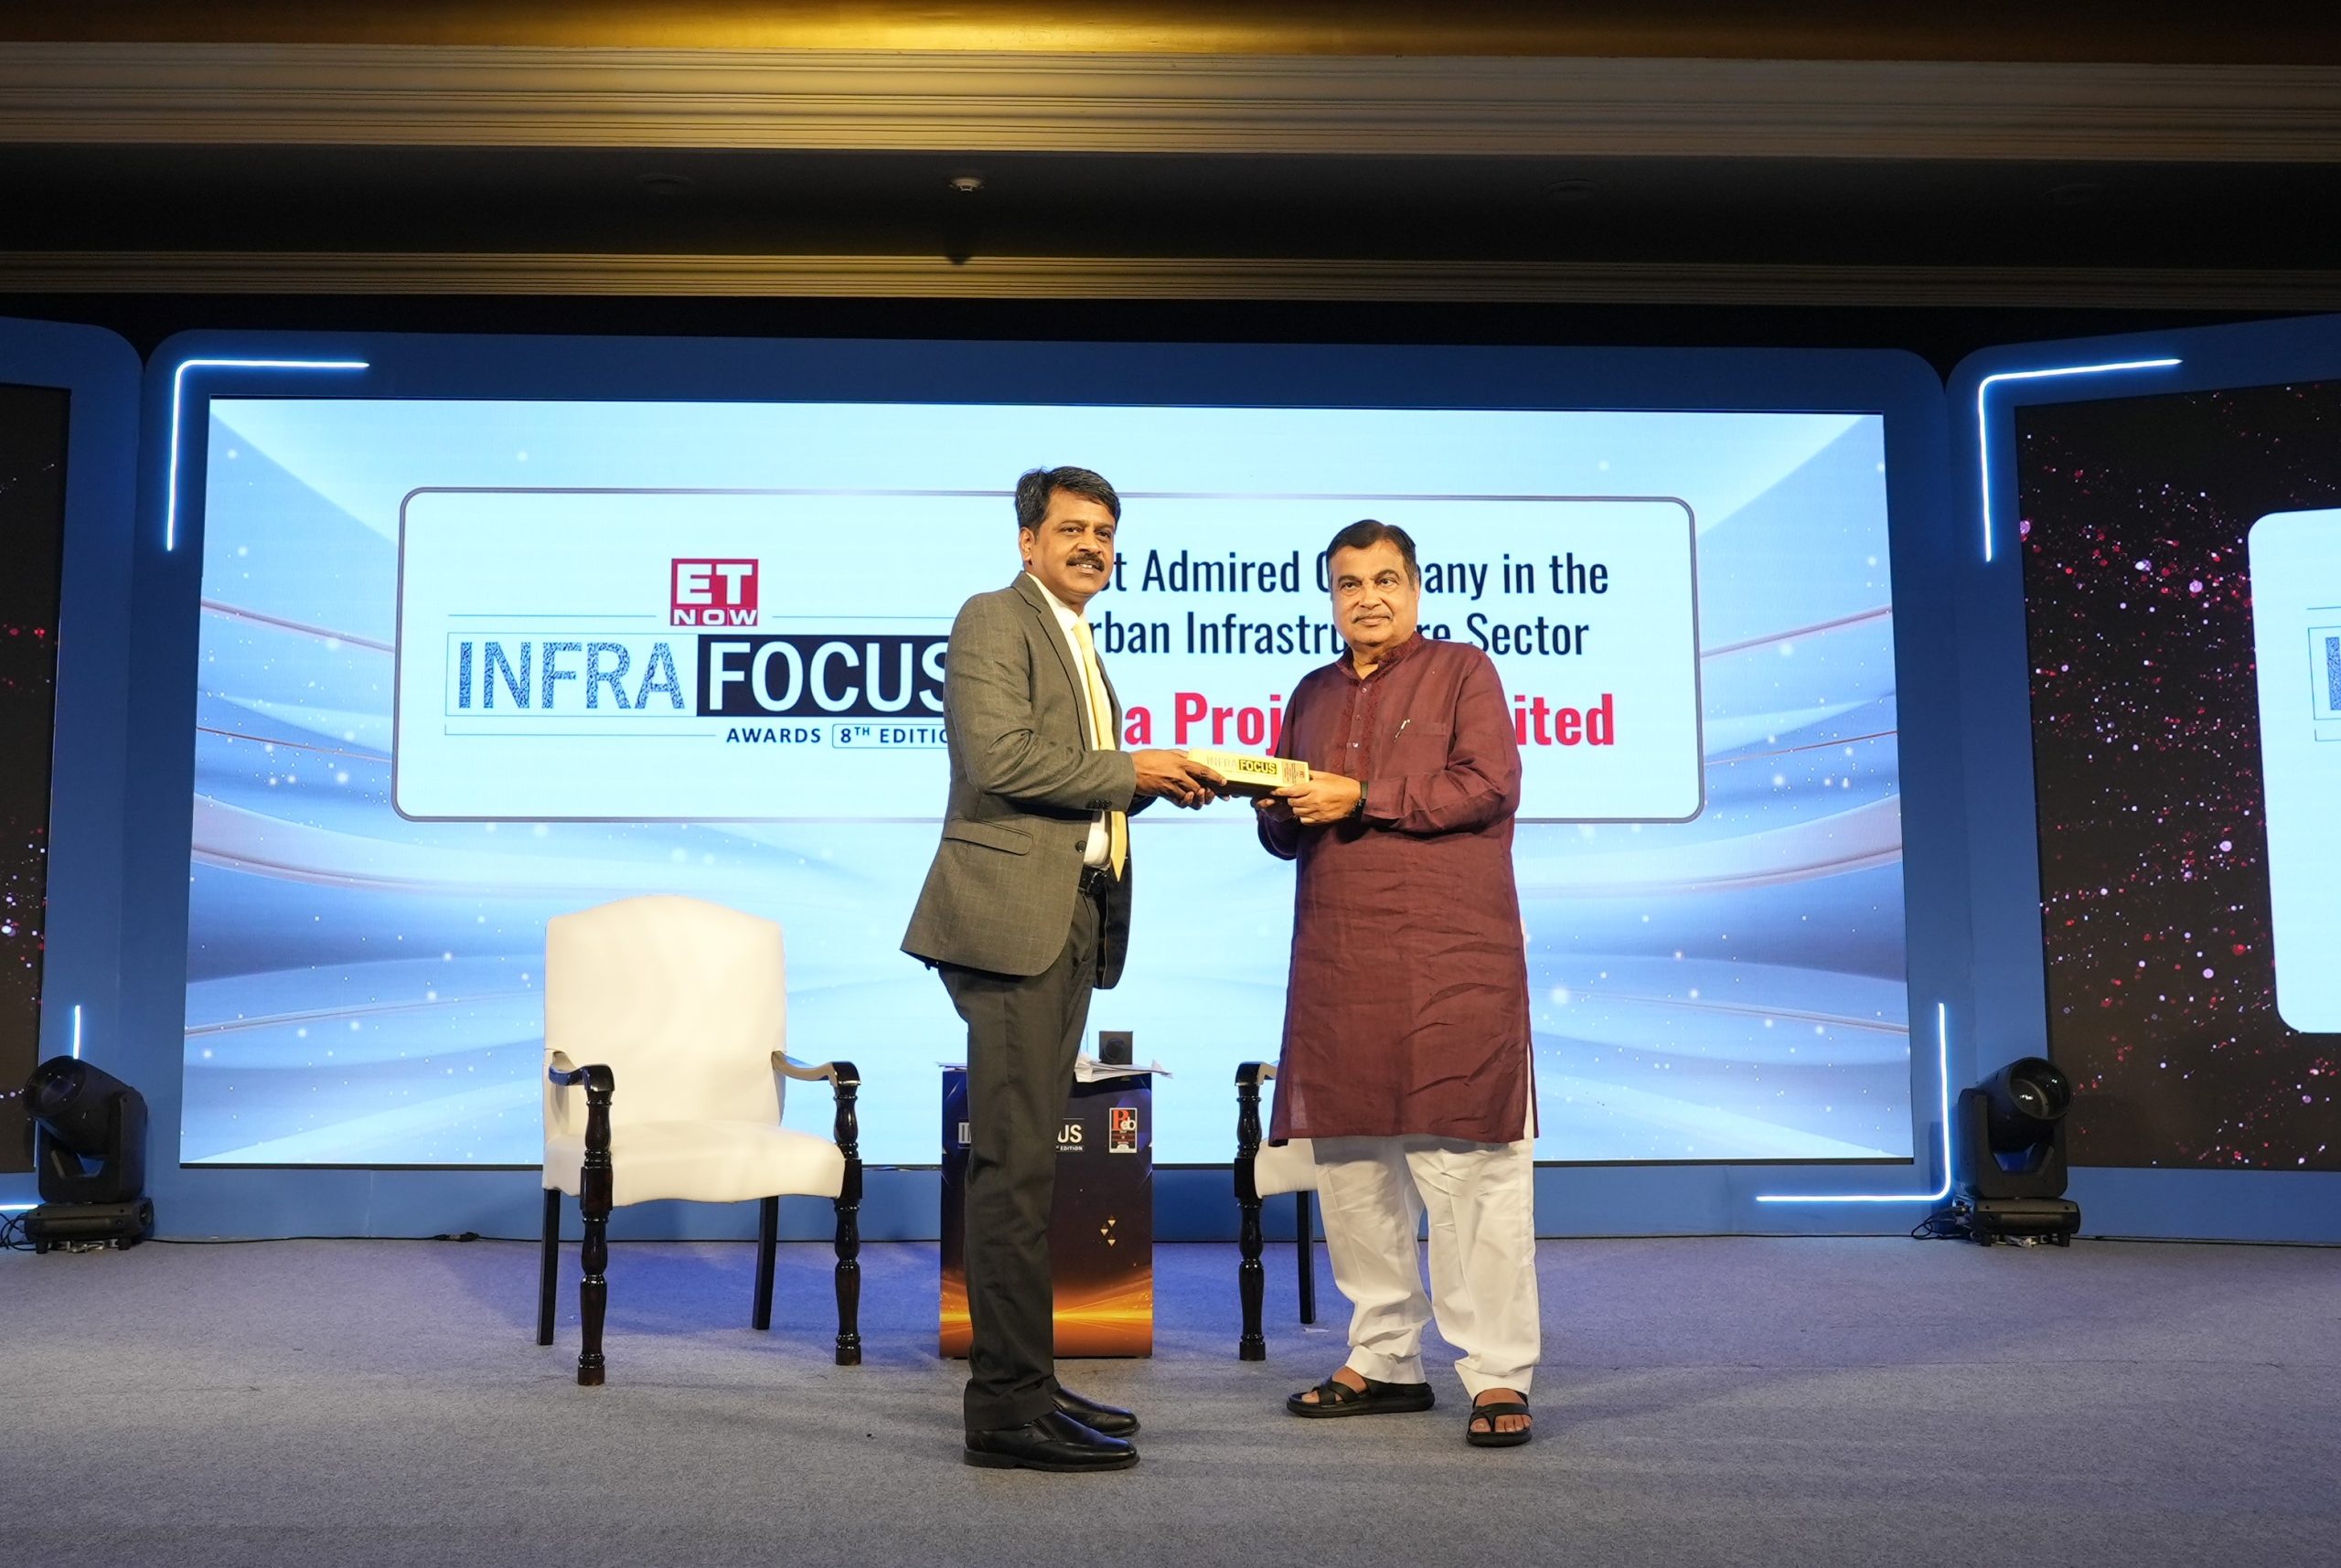 ET Infrafocus Awards 2023 awarded Most Admired Company in Urban Infrastructure to Tata Projects Ltd